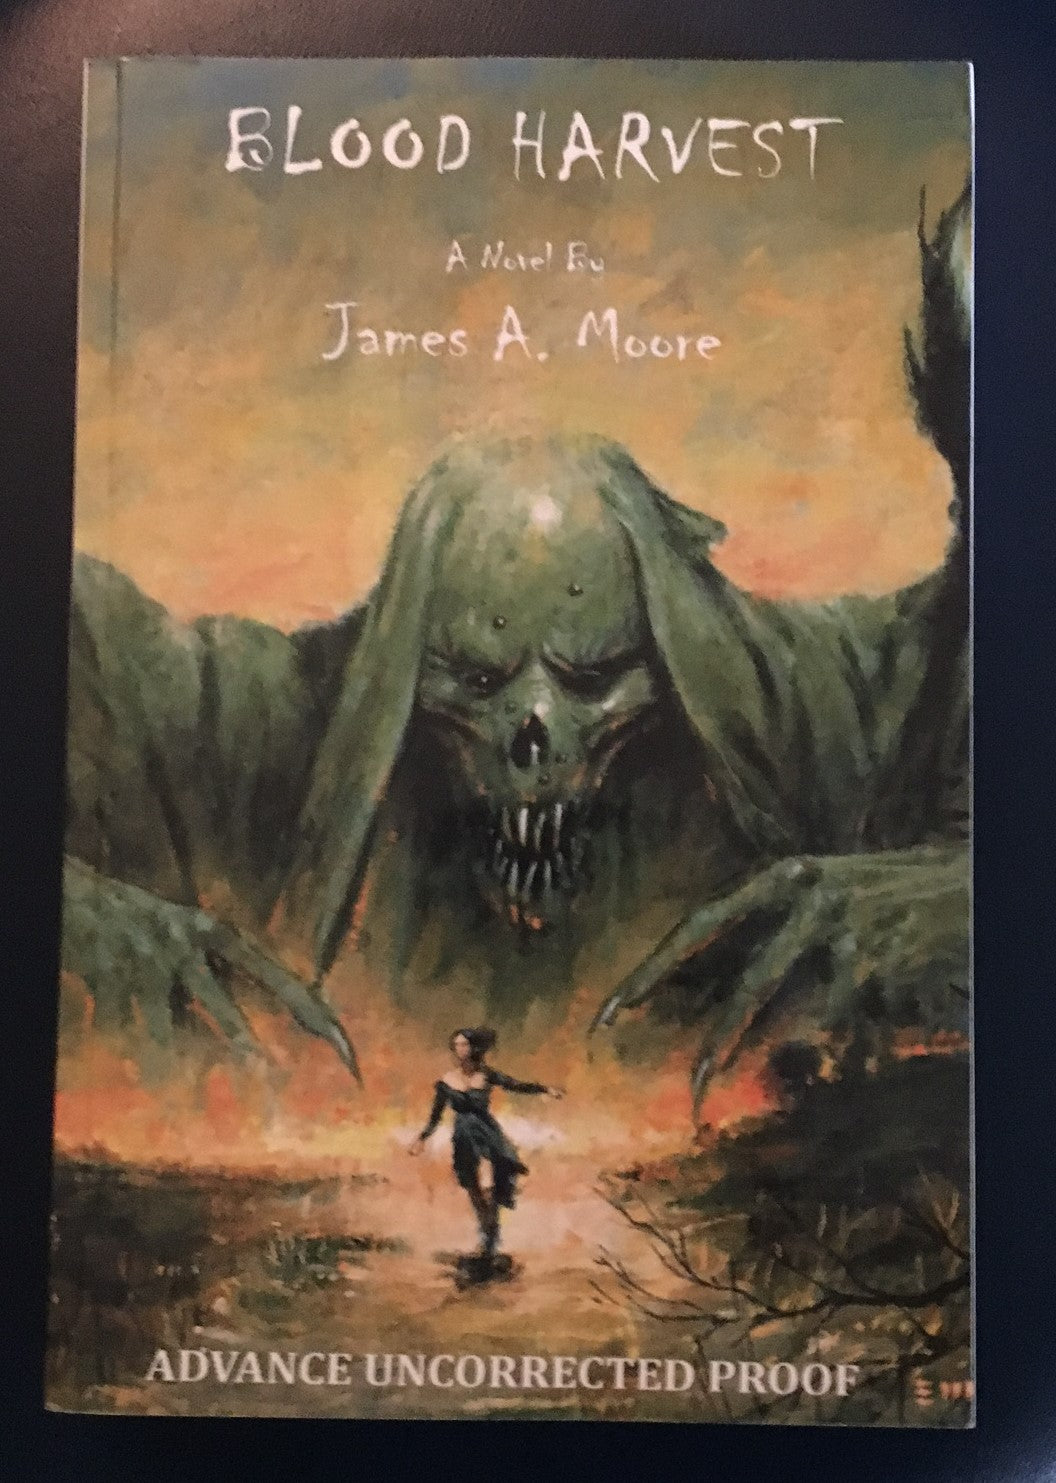 Blood Harvest by James A. Moore (Rare Earthling Publications ARC/Proof)